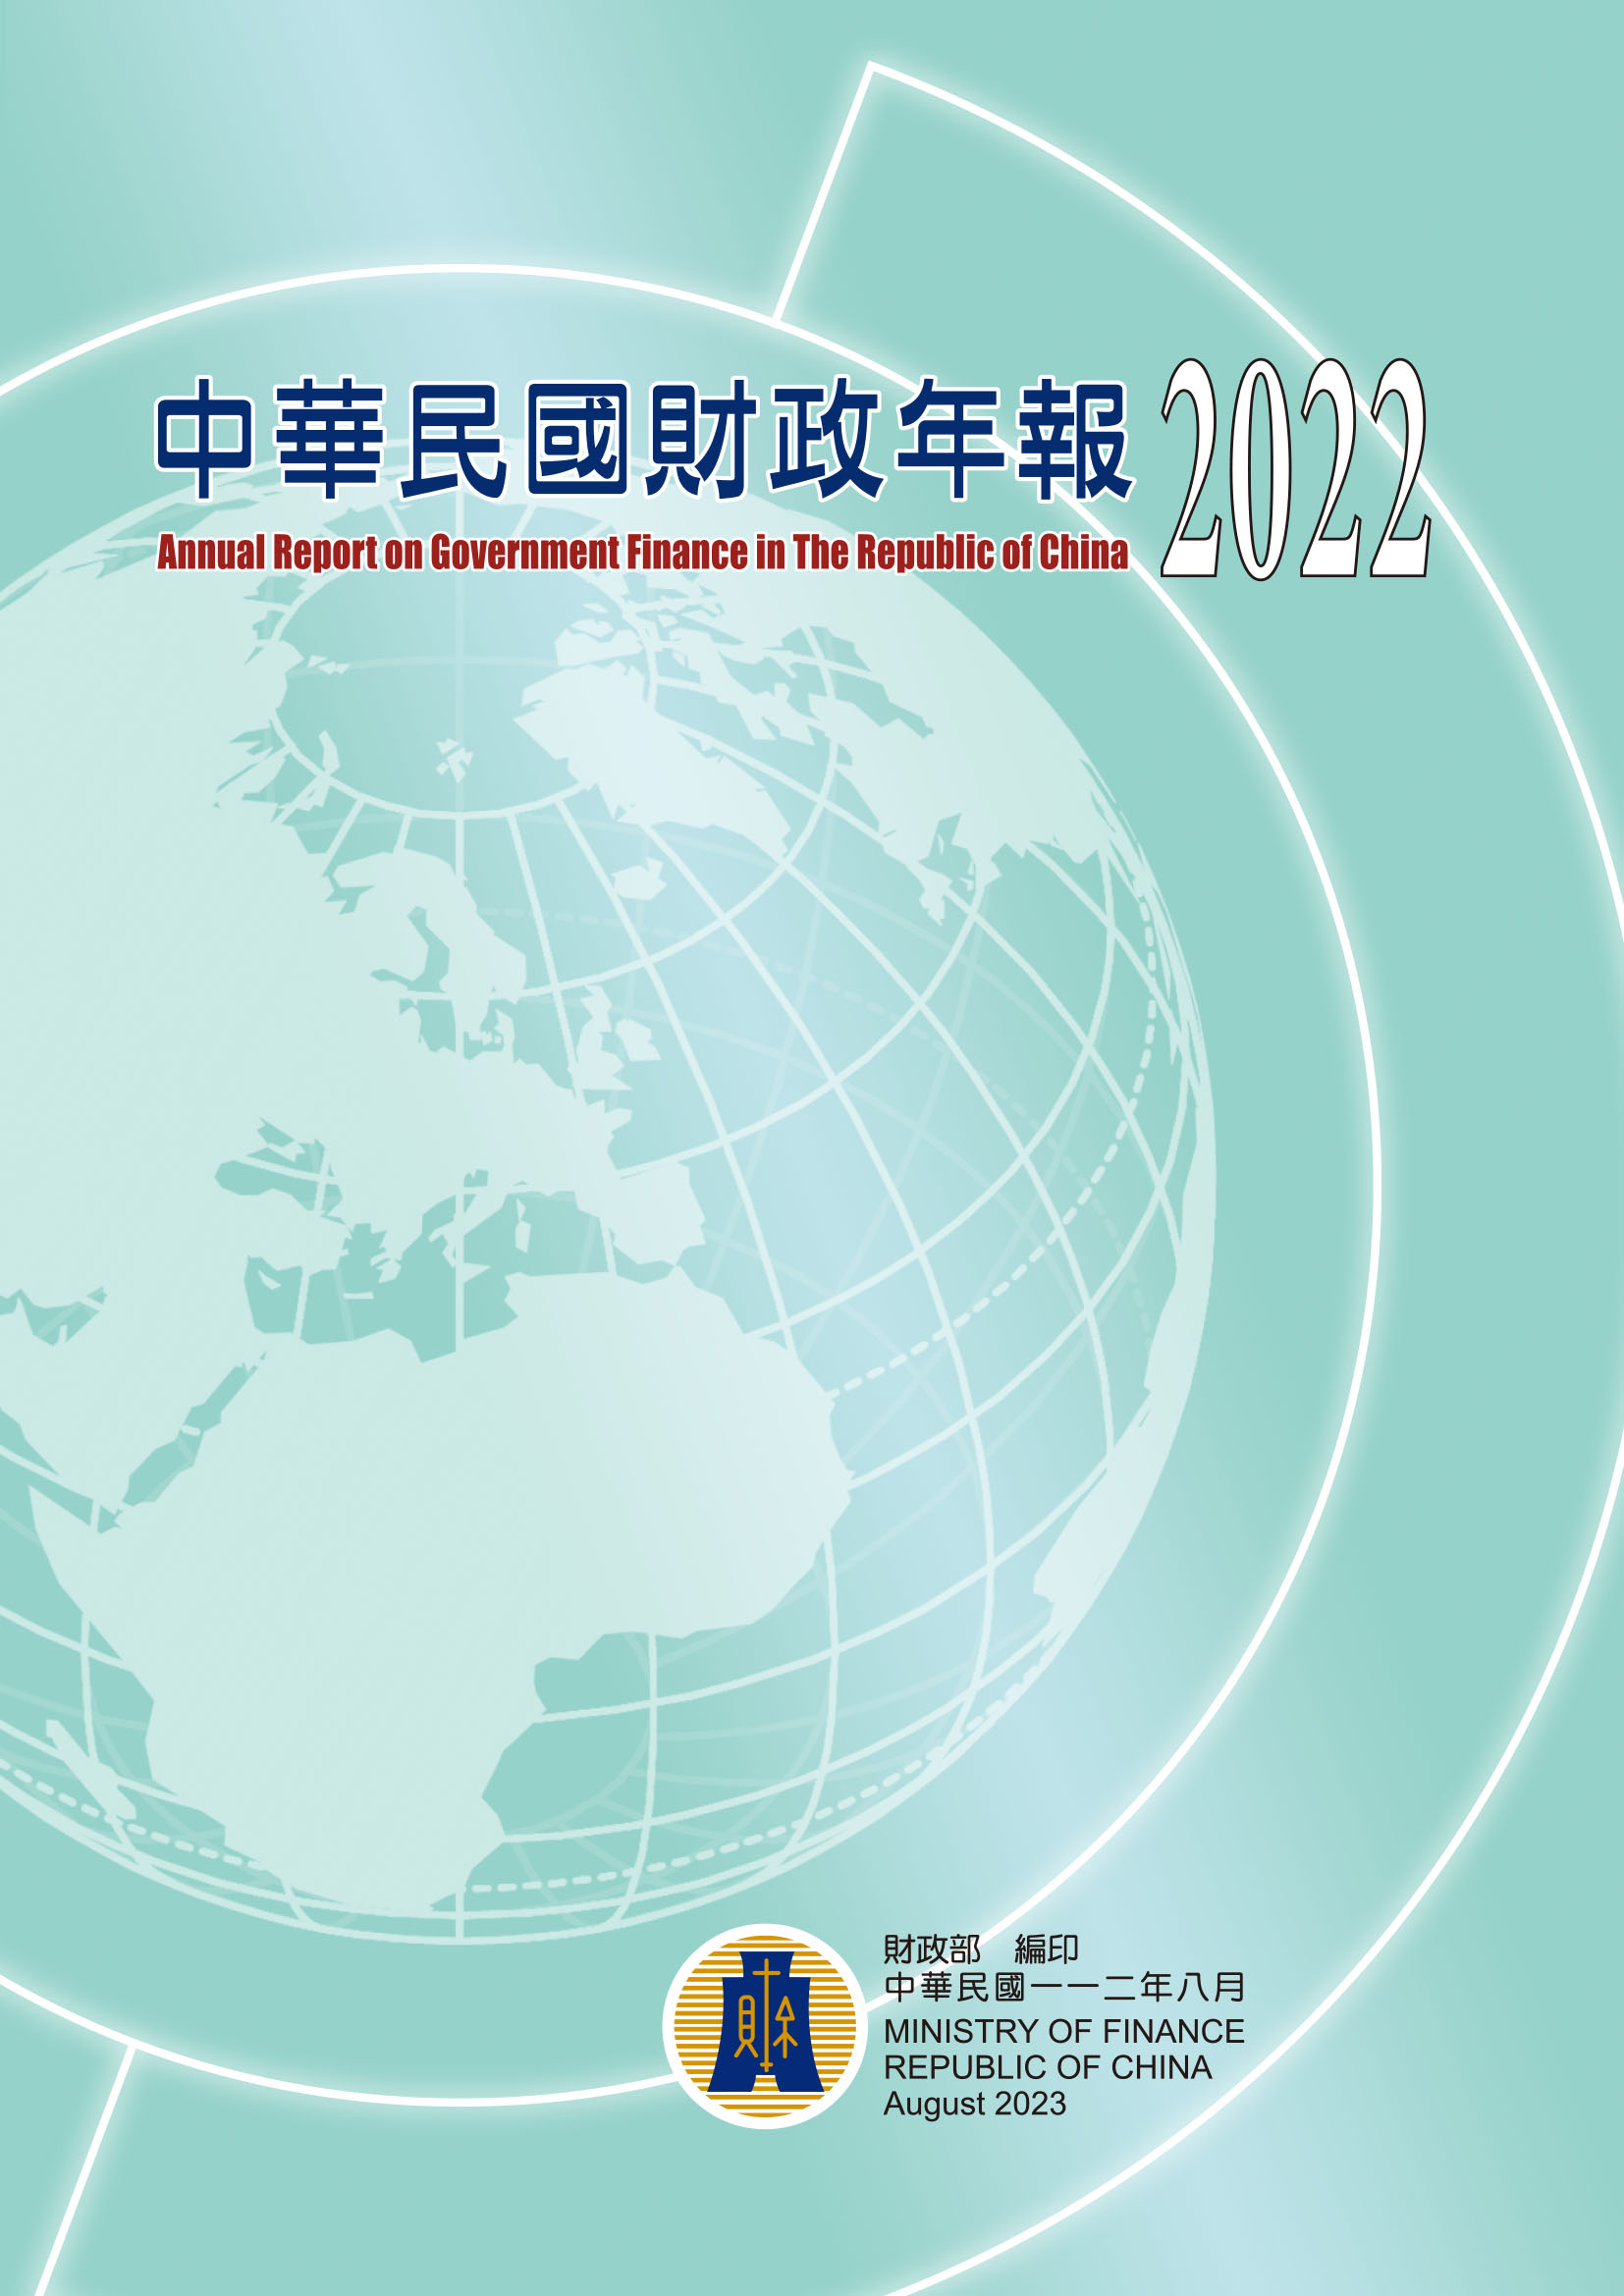 Annual Report on Government Finance in the Republic of China 2022